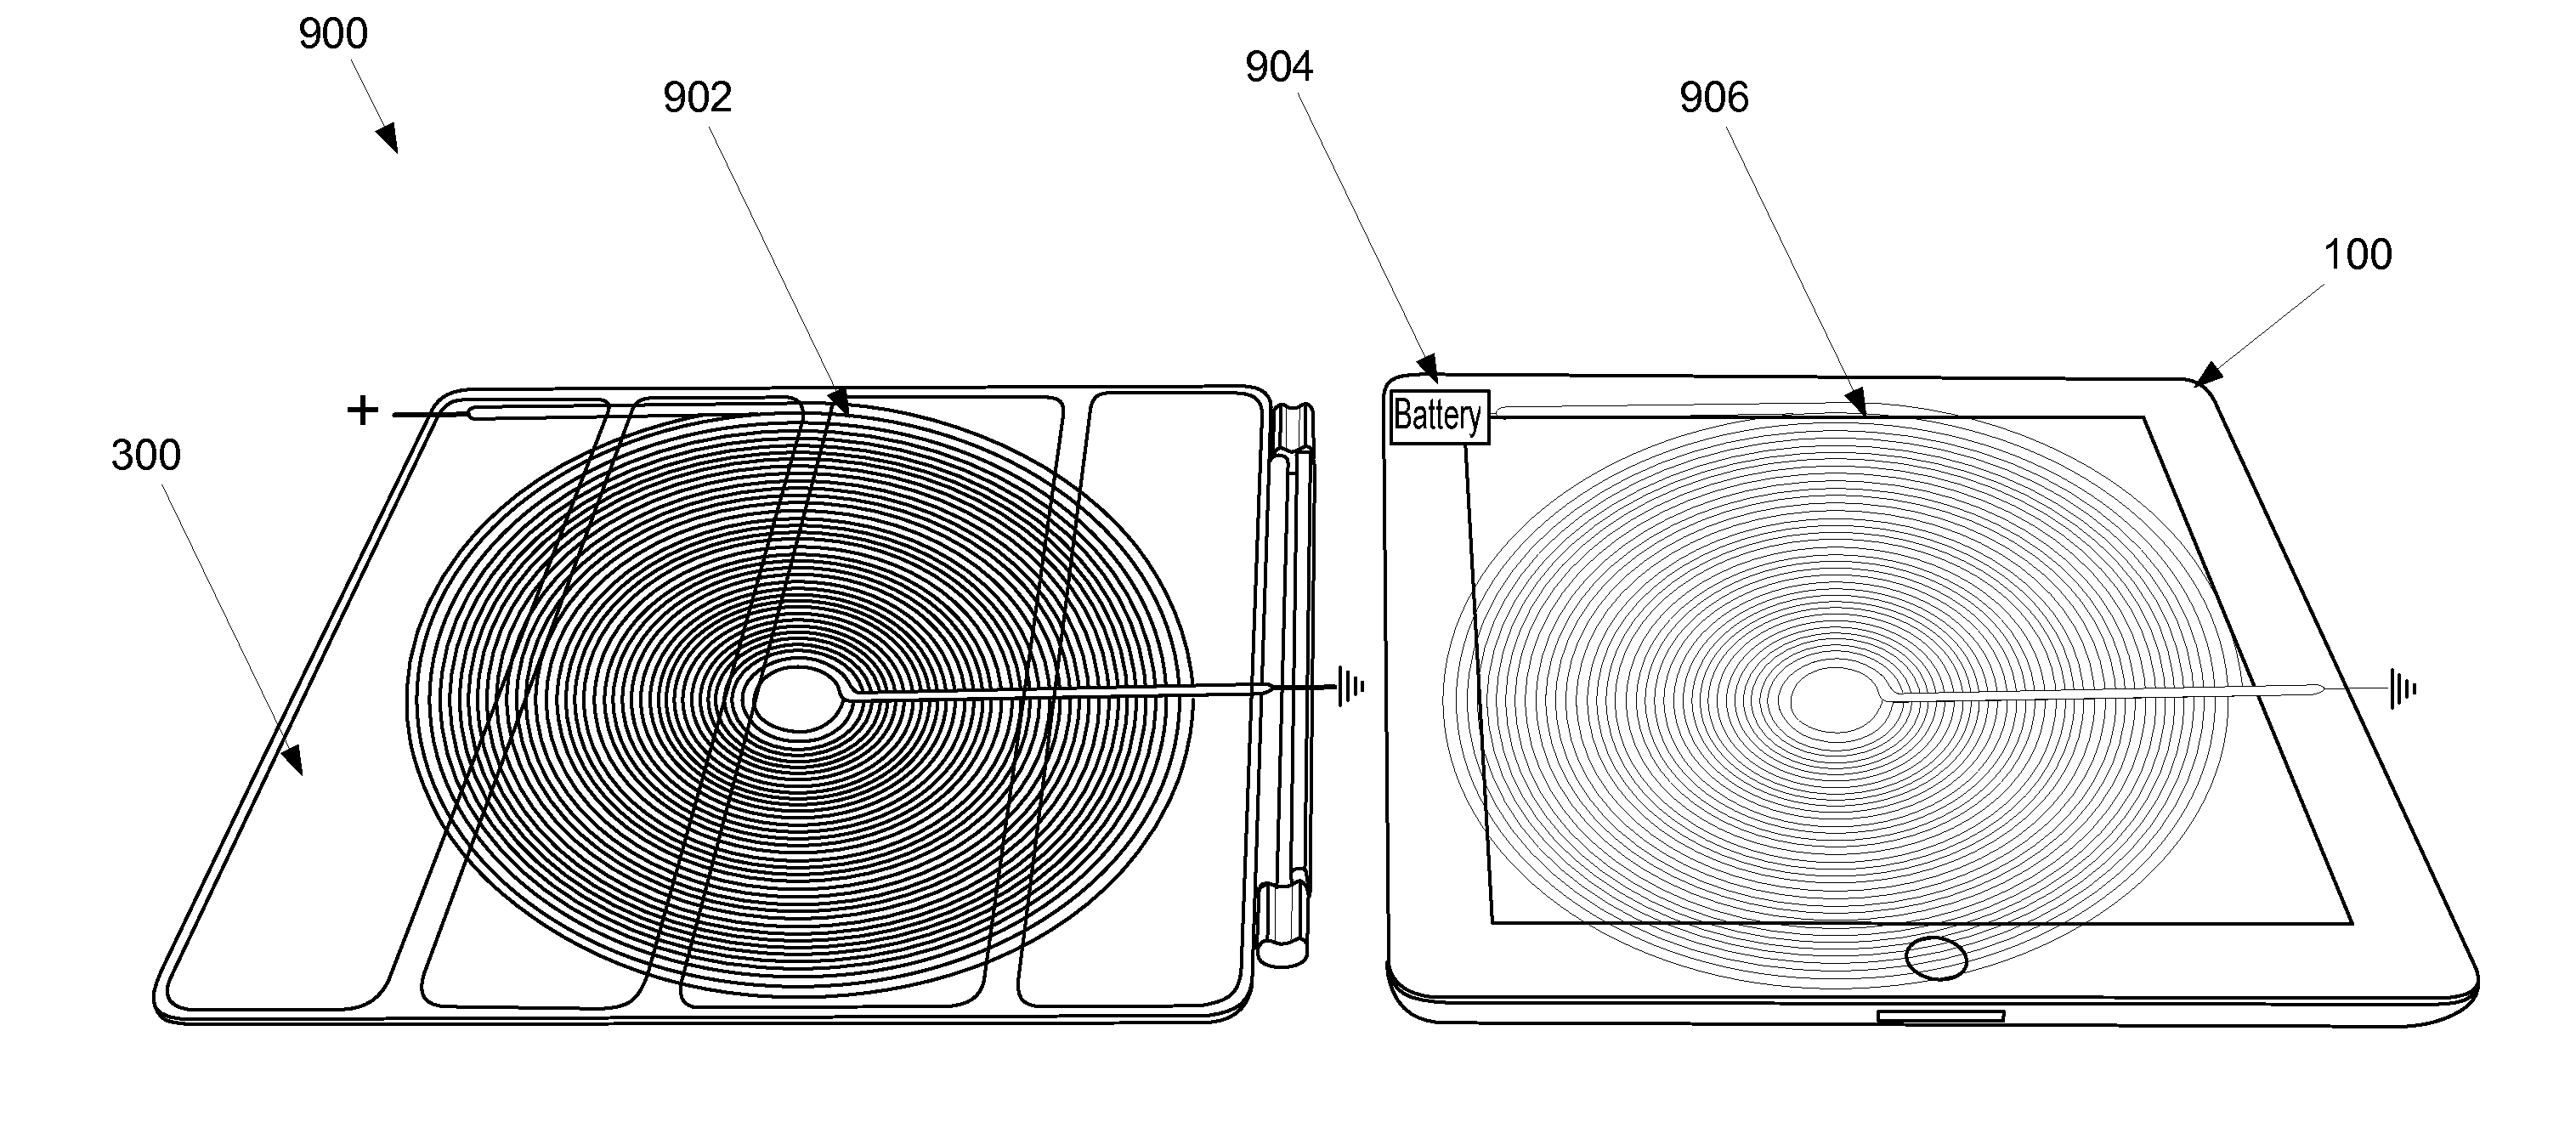 Integrated inductive charging in protective cover